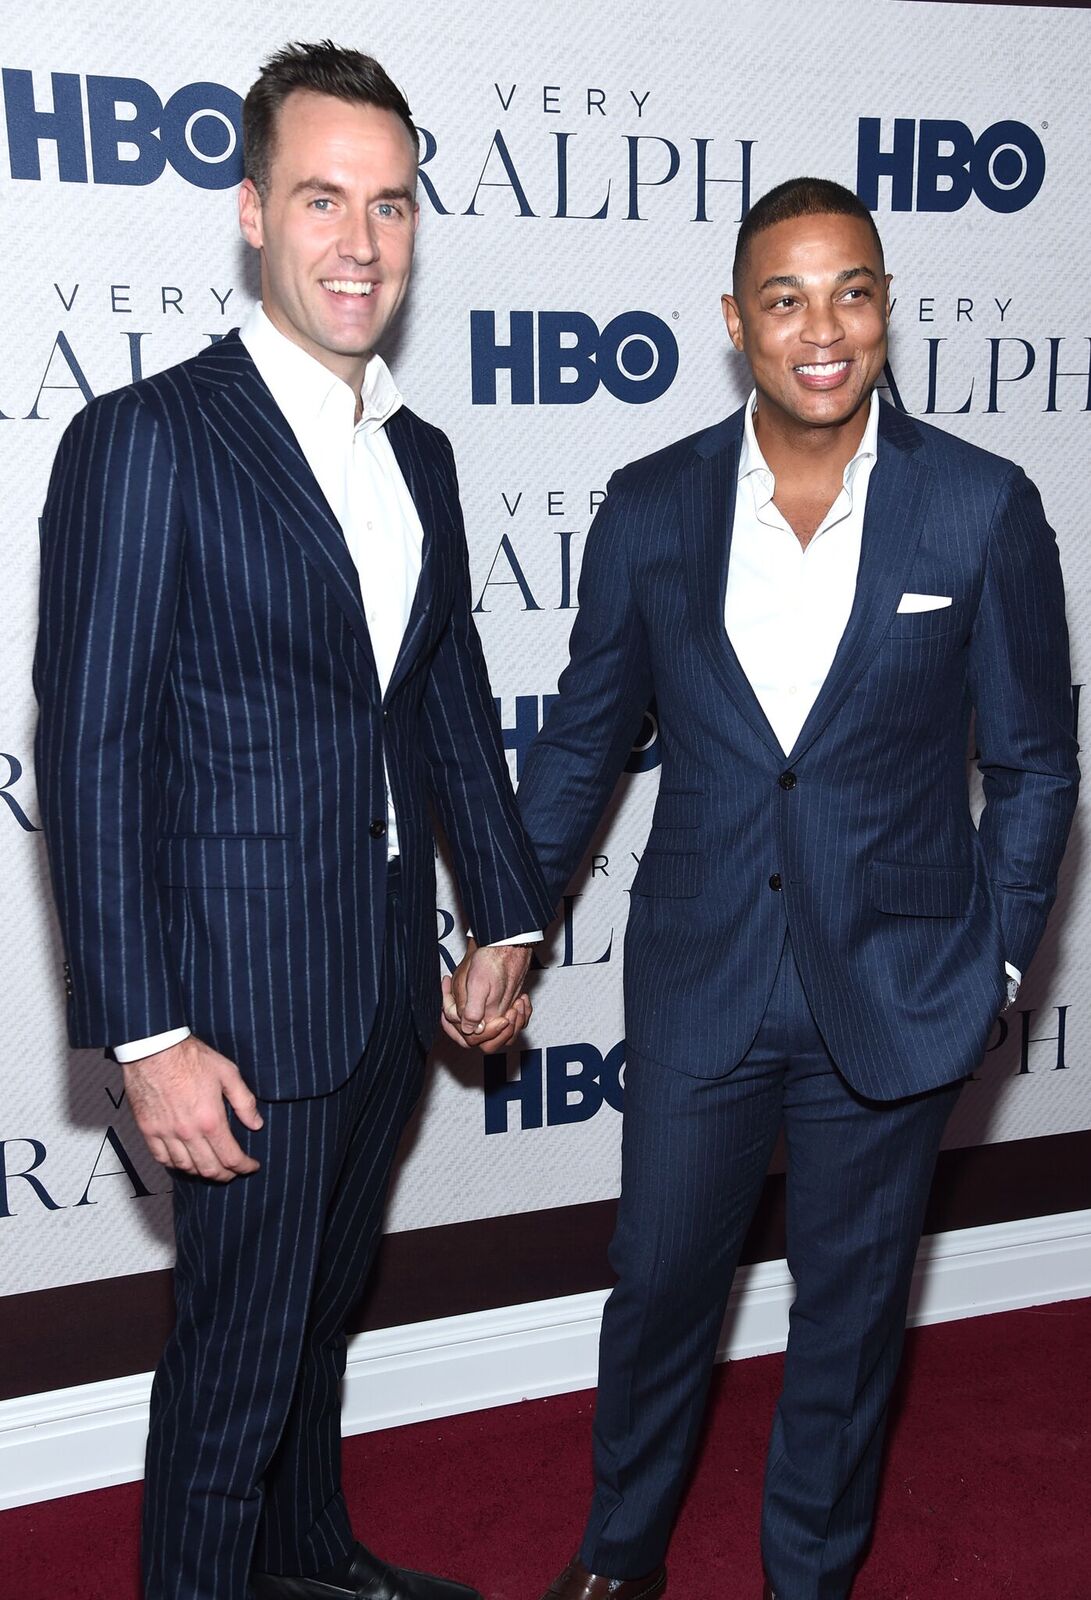 Tim Malone and Don Lemon attend HBO's "Very Ralph" World Premiere at The Metropolitan Museum of Art on October 23, 2019 | Photo: Getty Images